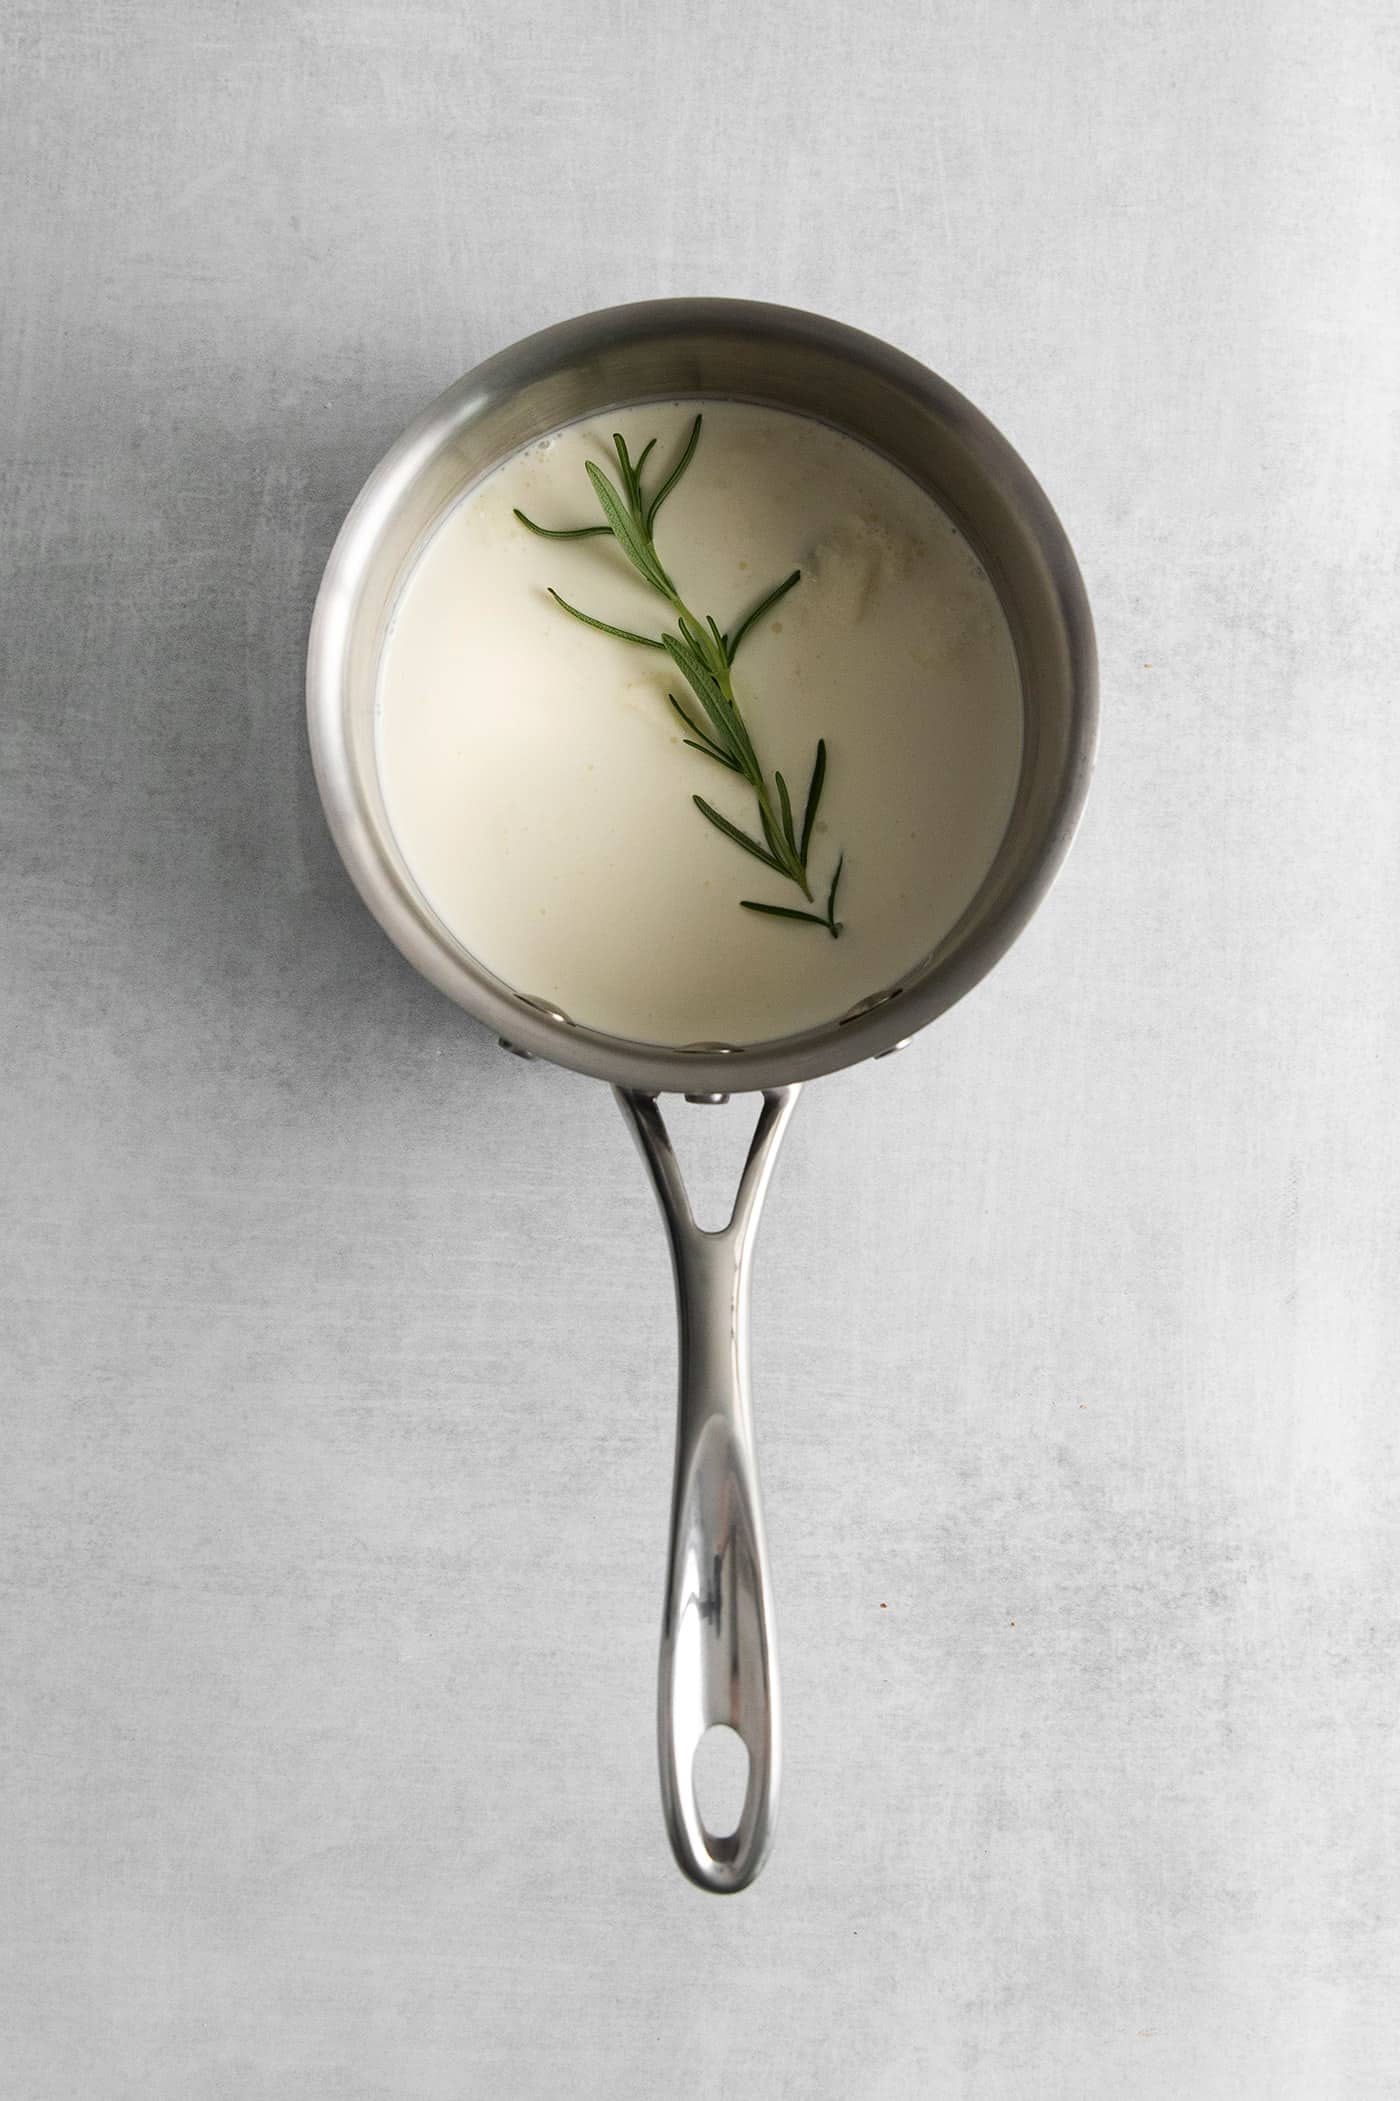 A rosemary spring in a saucepan of heavy cream